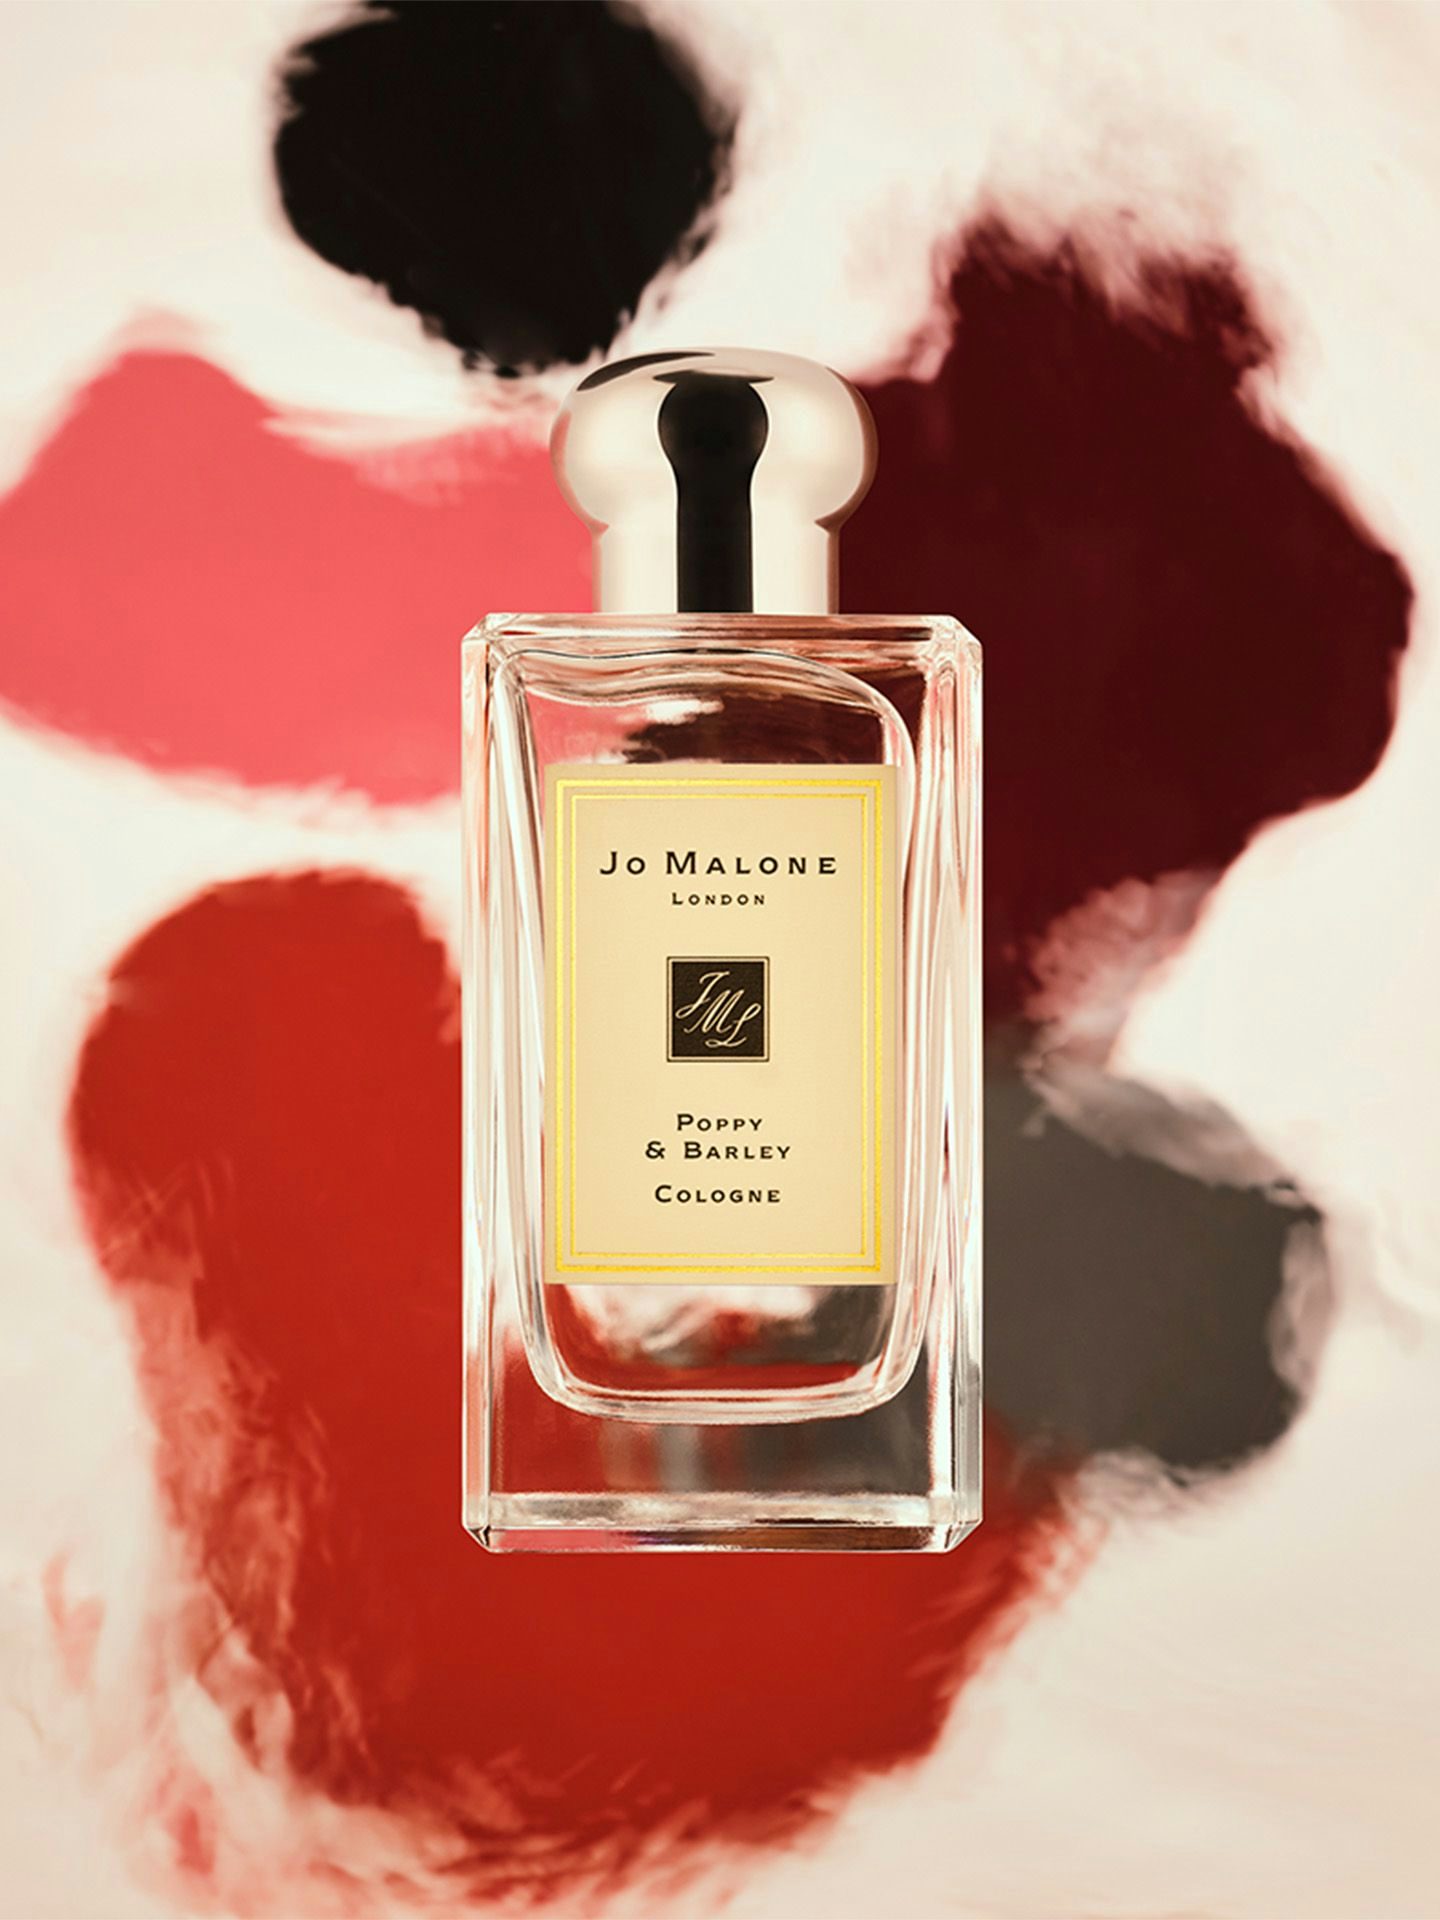 A Jo Malone perfume bottle appears to float above blurred color spots.